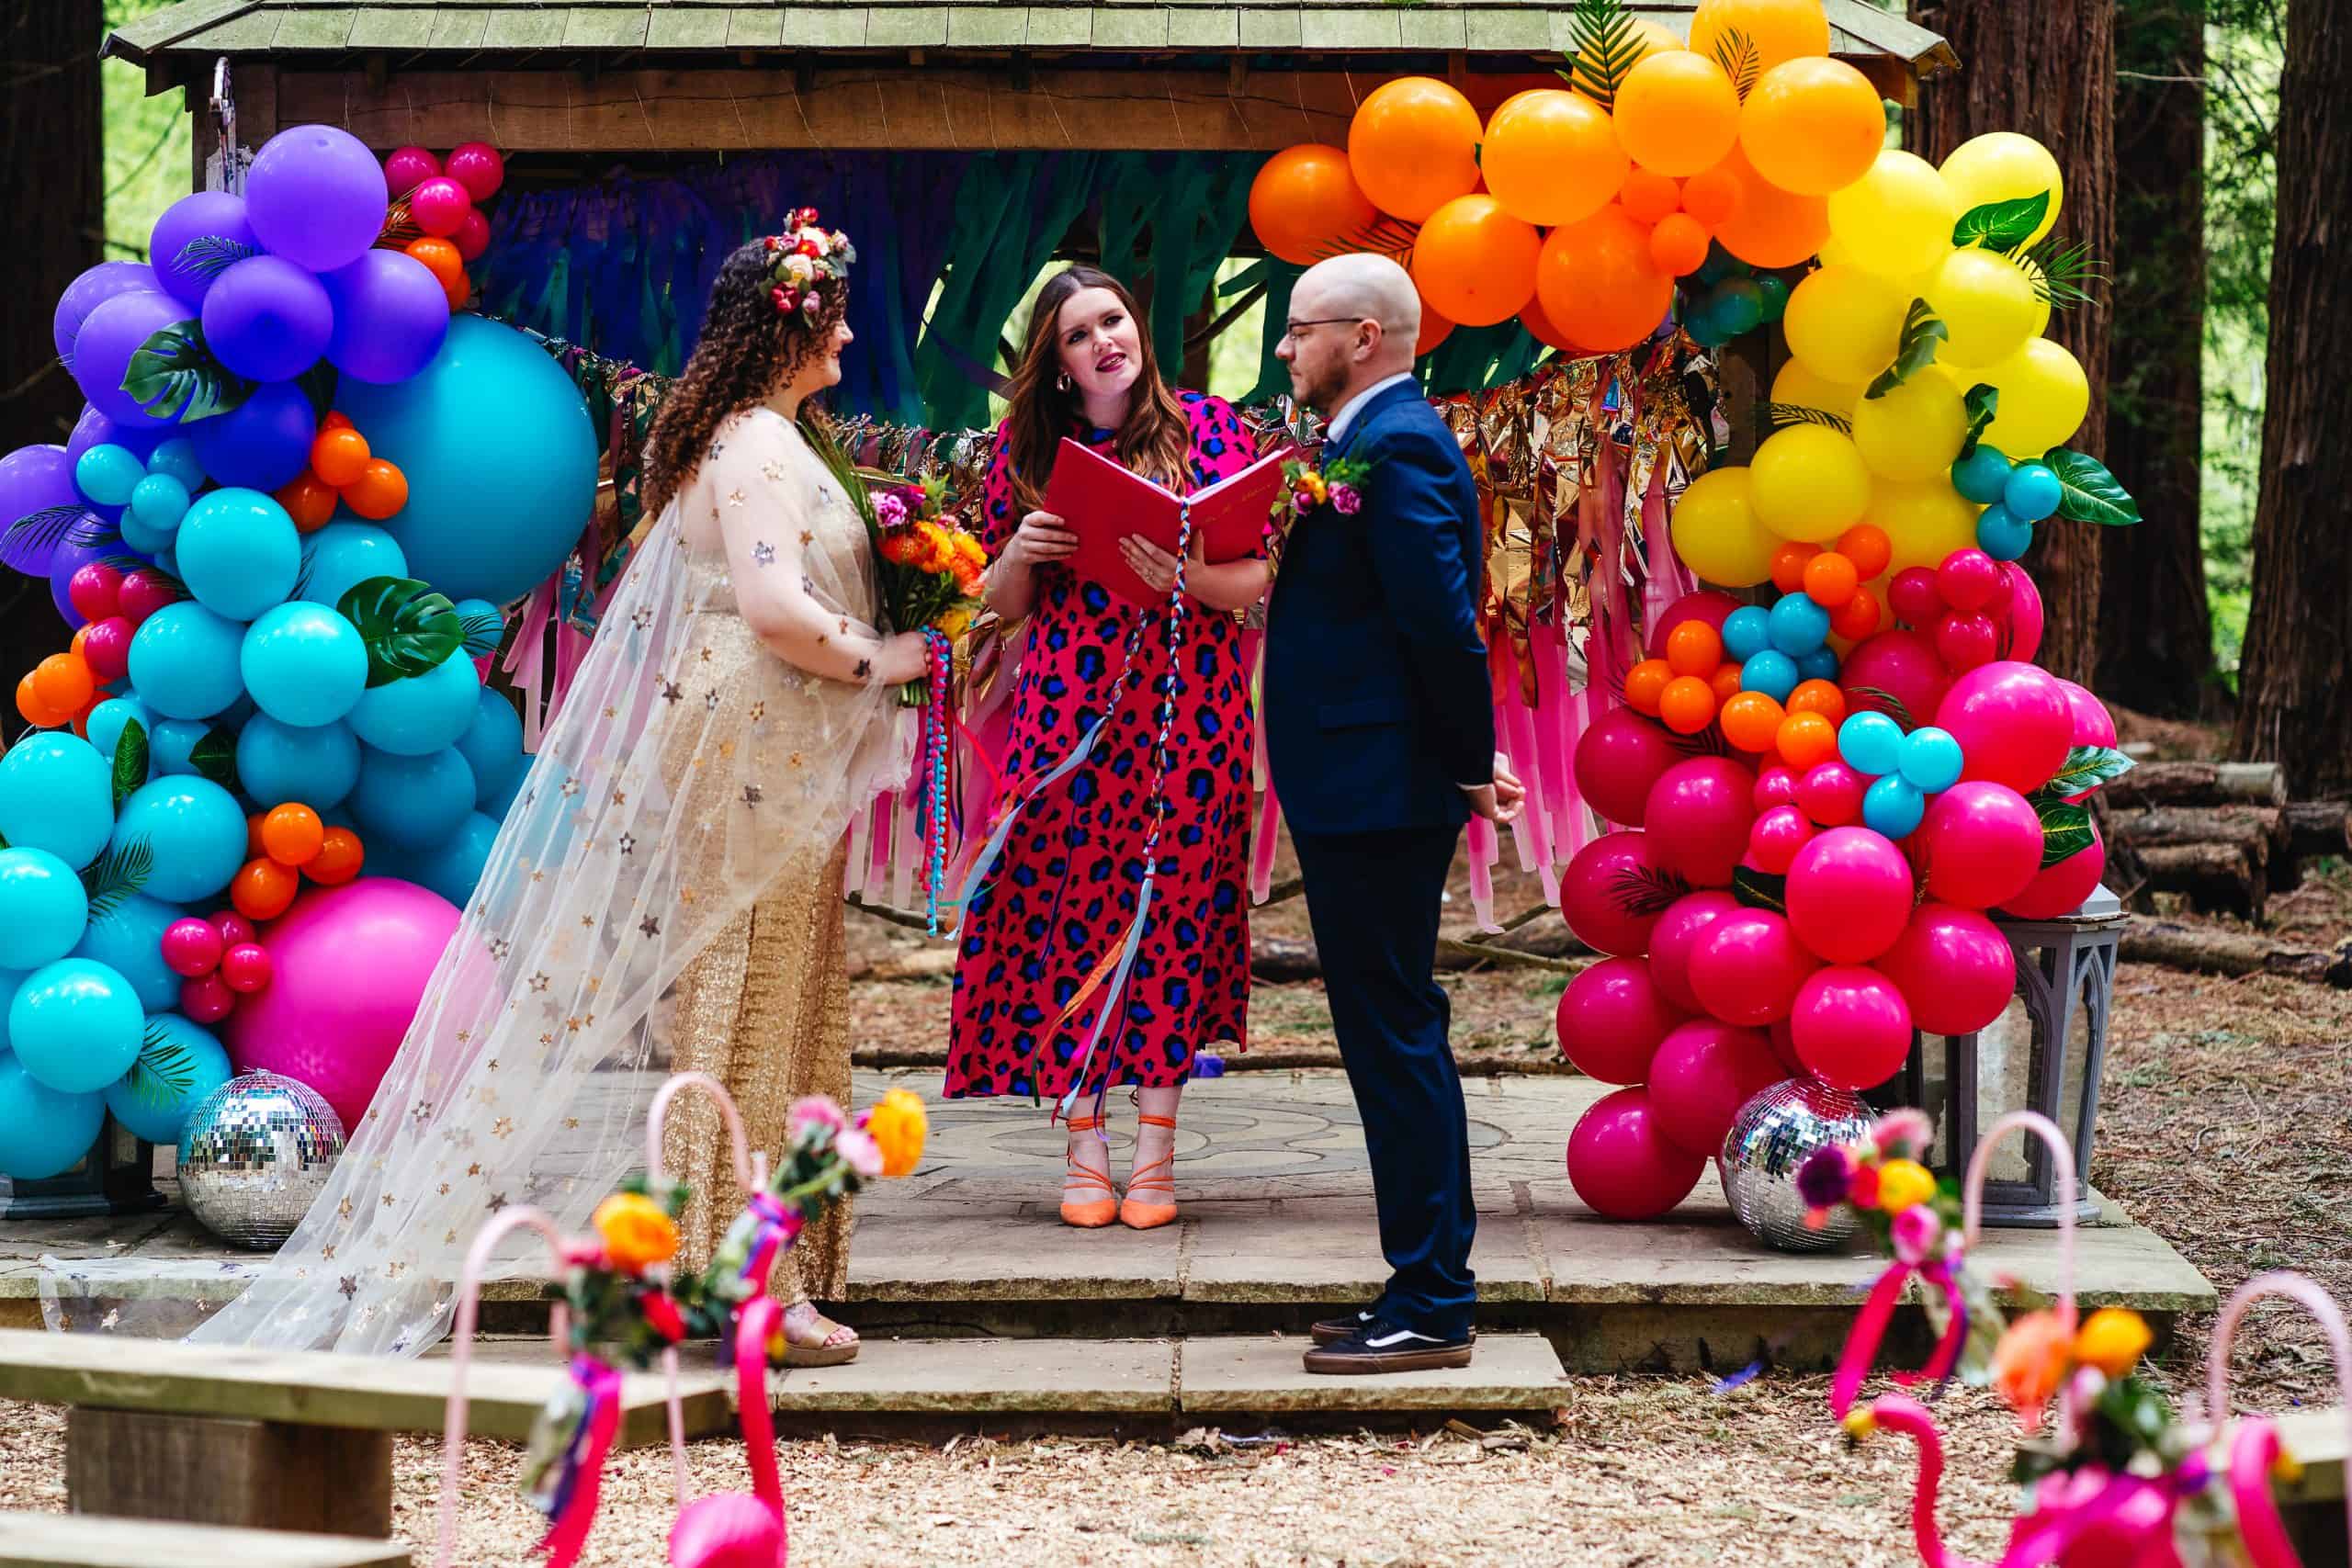 A fun and colourful wedding day outdoor ceremony